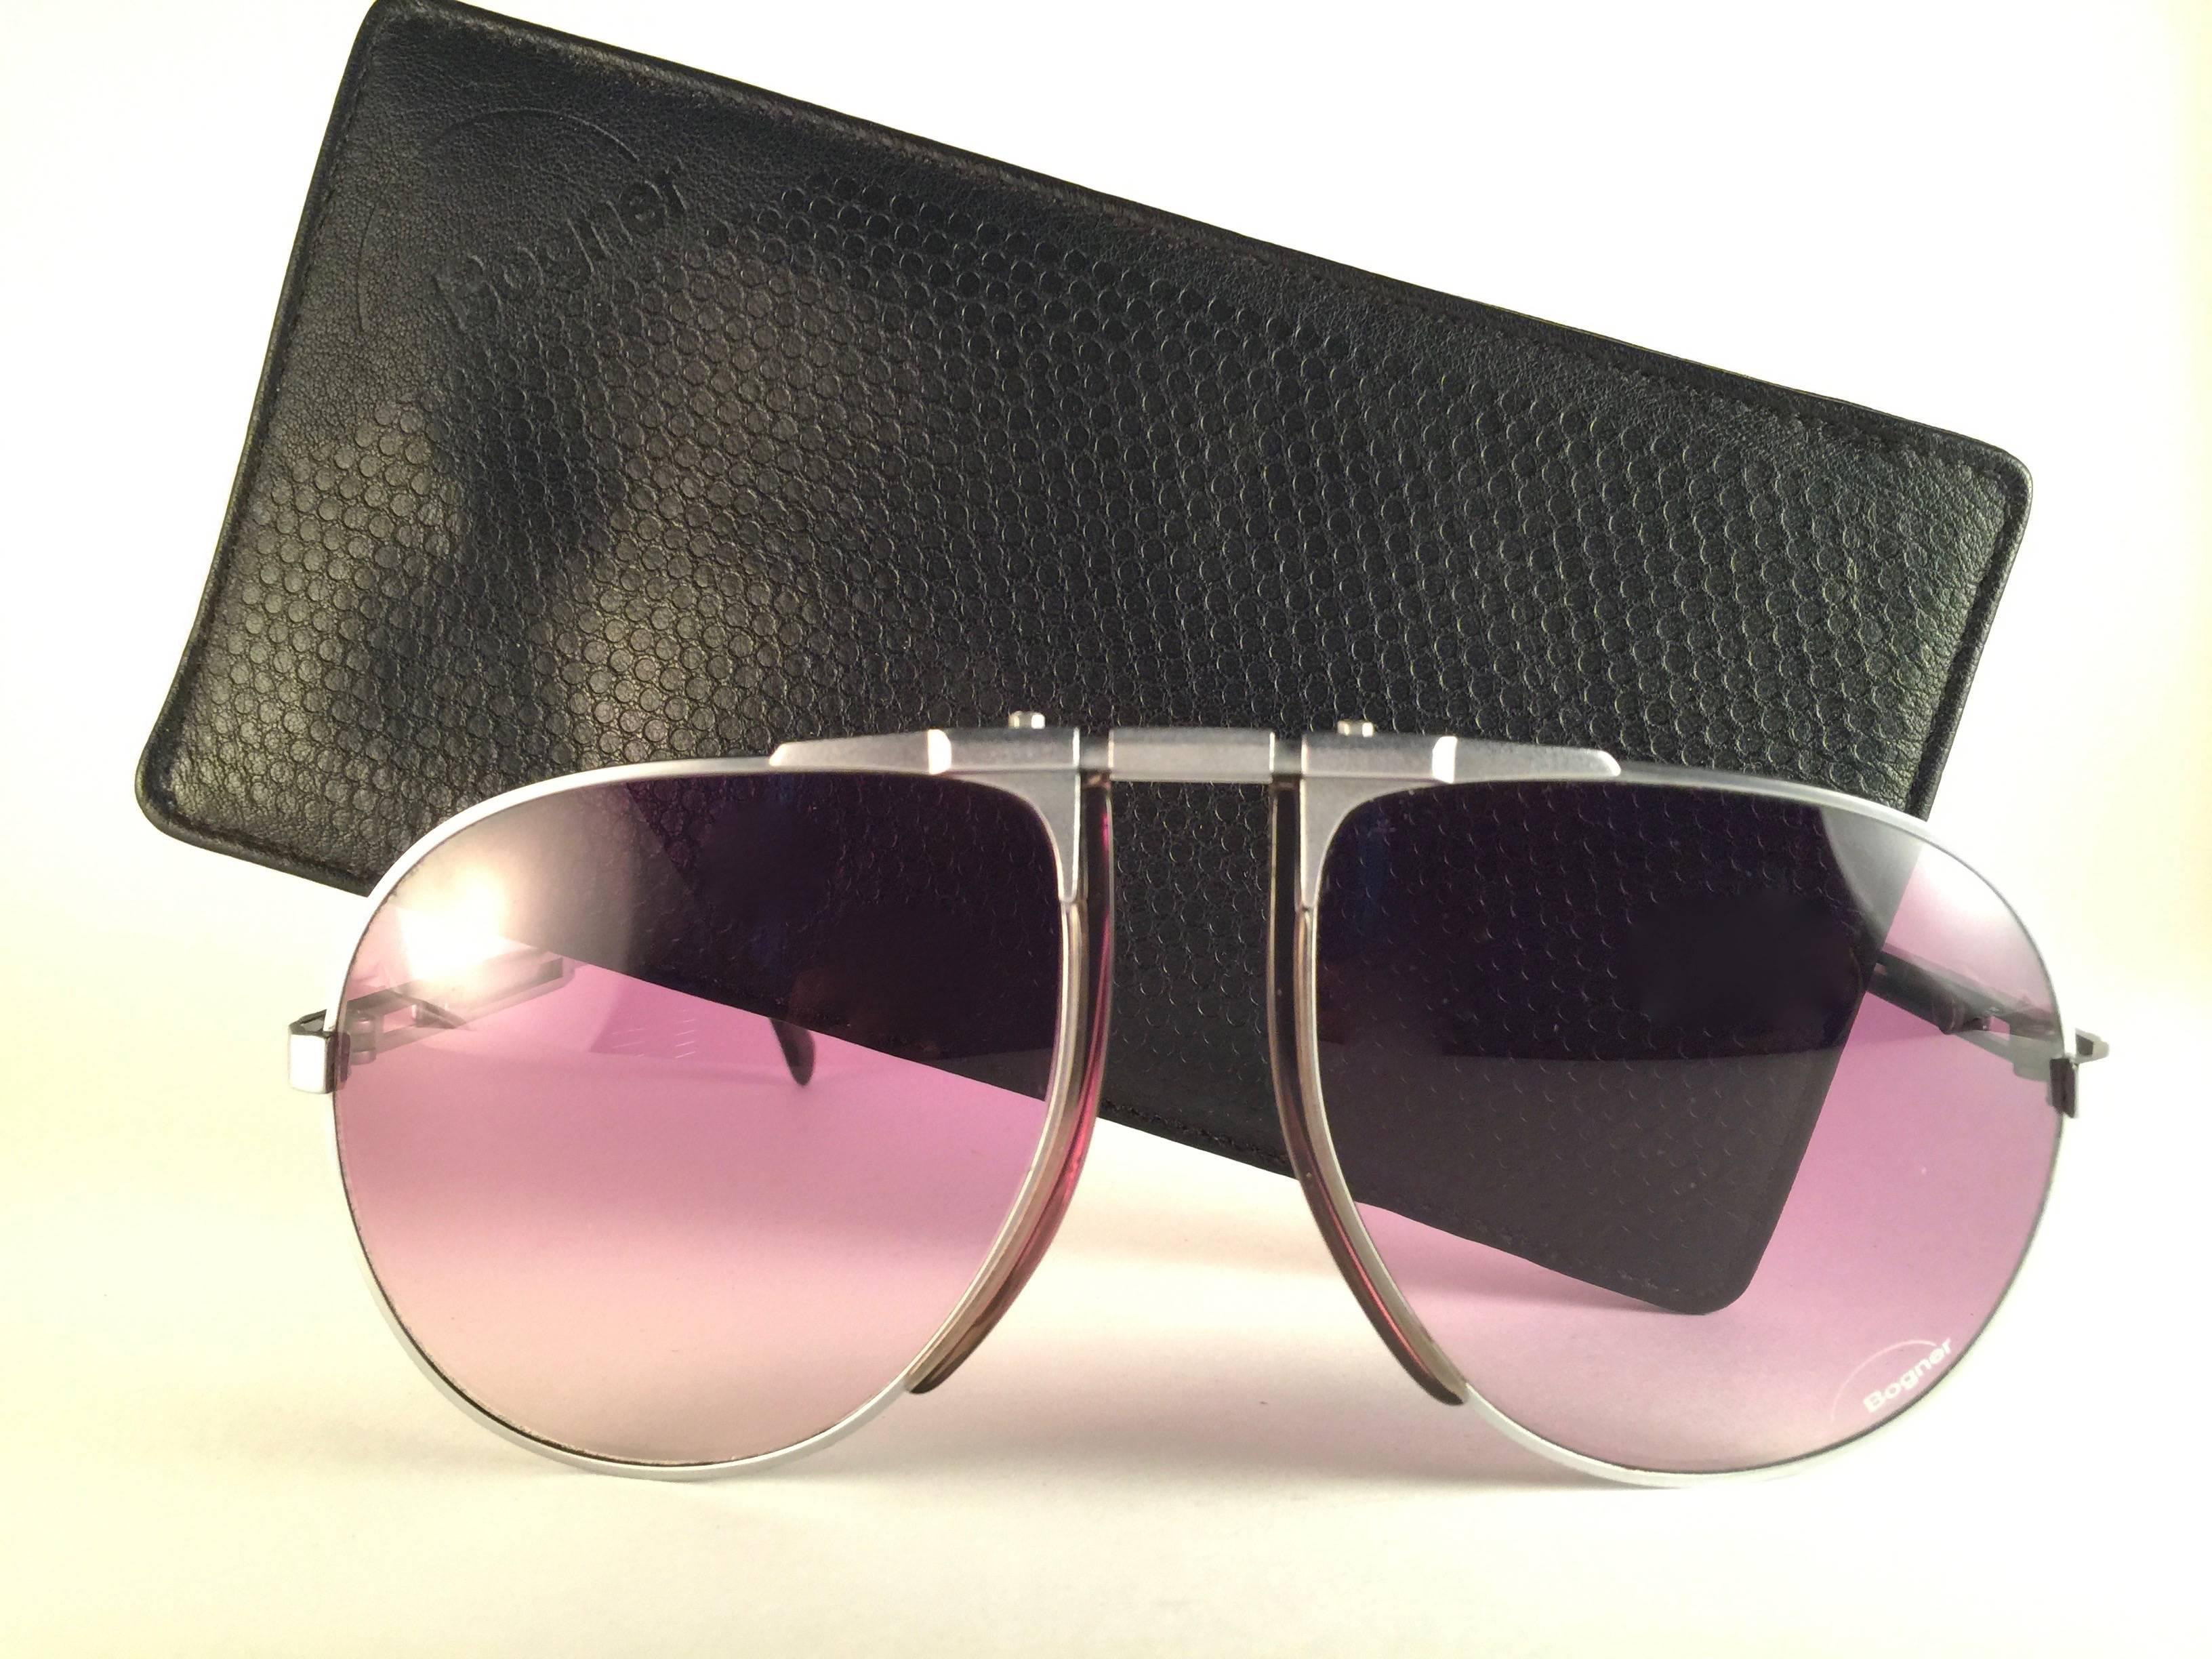 Collector's item.  
New vintage Bogner by Eschenbach sunglasses 7004 11 in matte silver with rose gradient lenses. The model is from the same series used by the late Roger Moore in 007's 